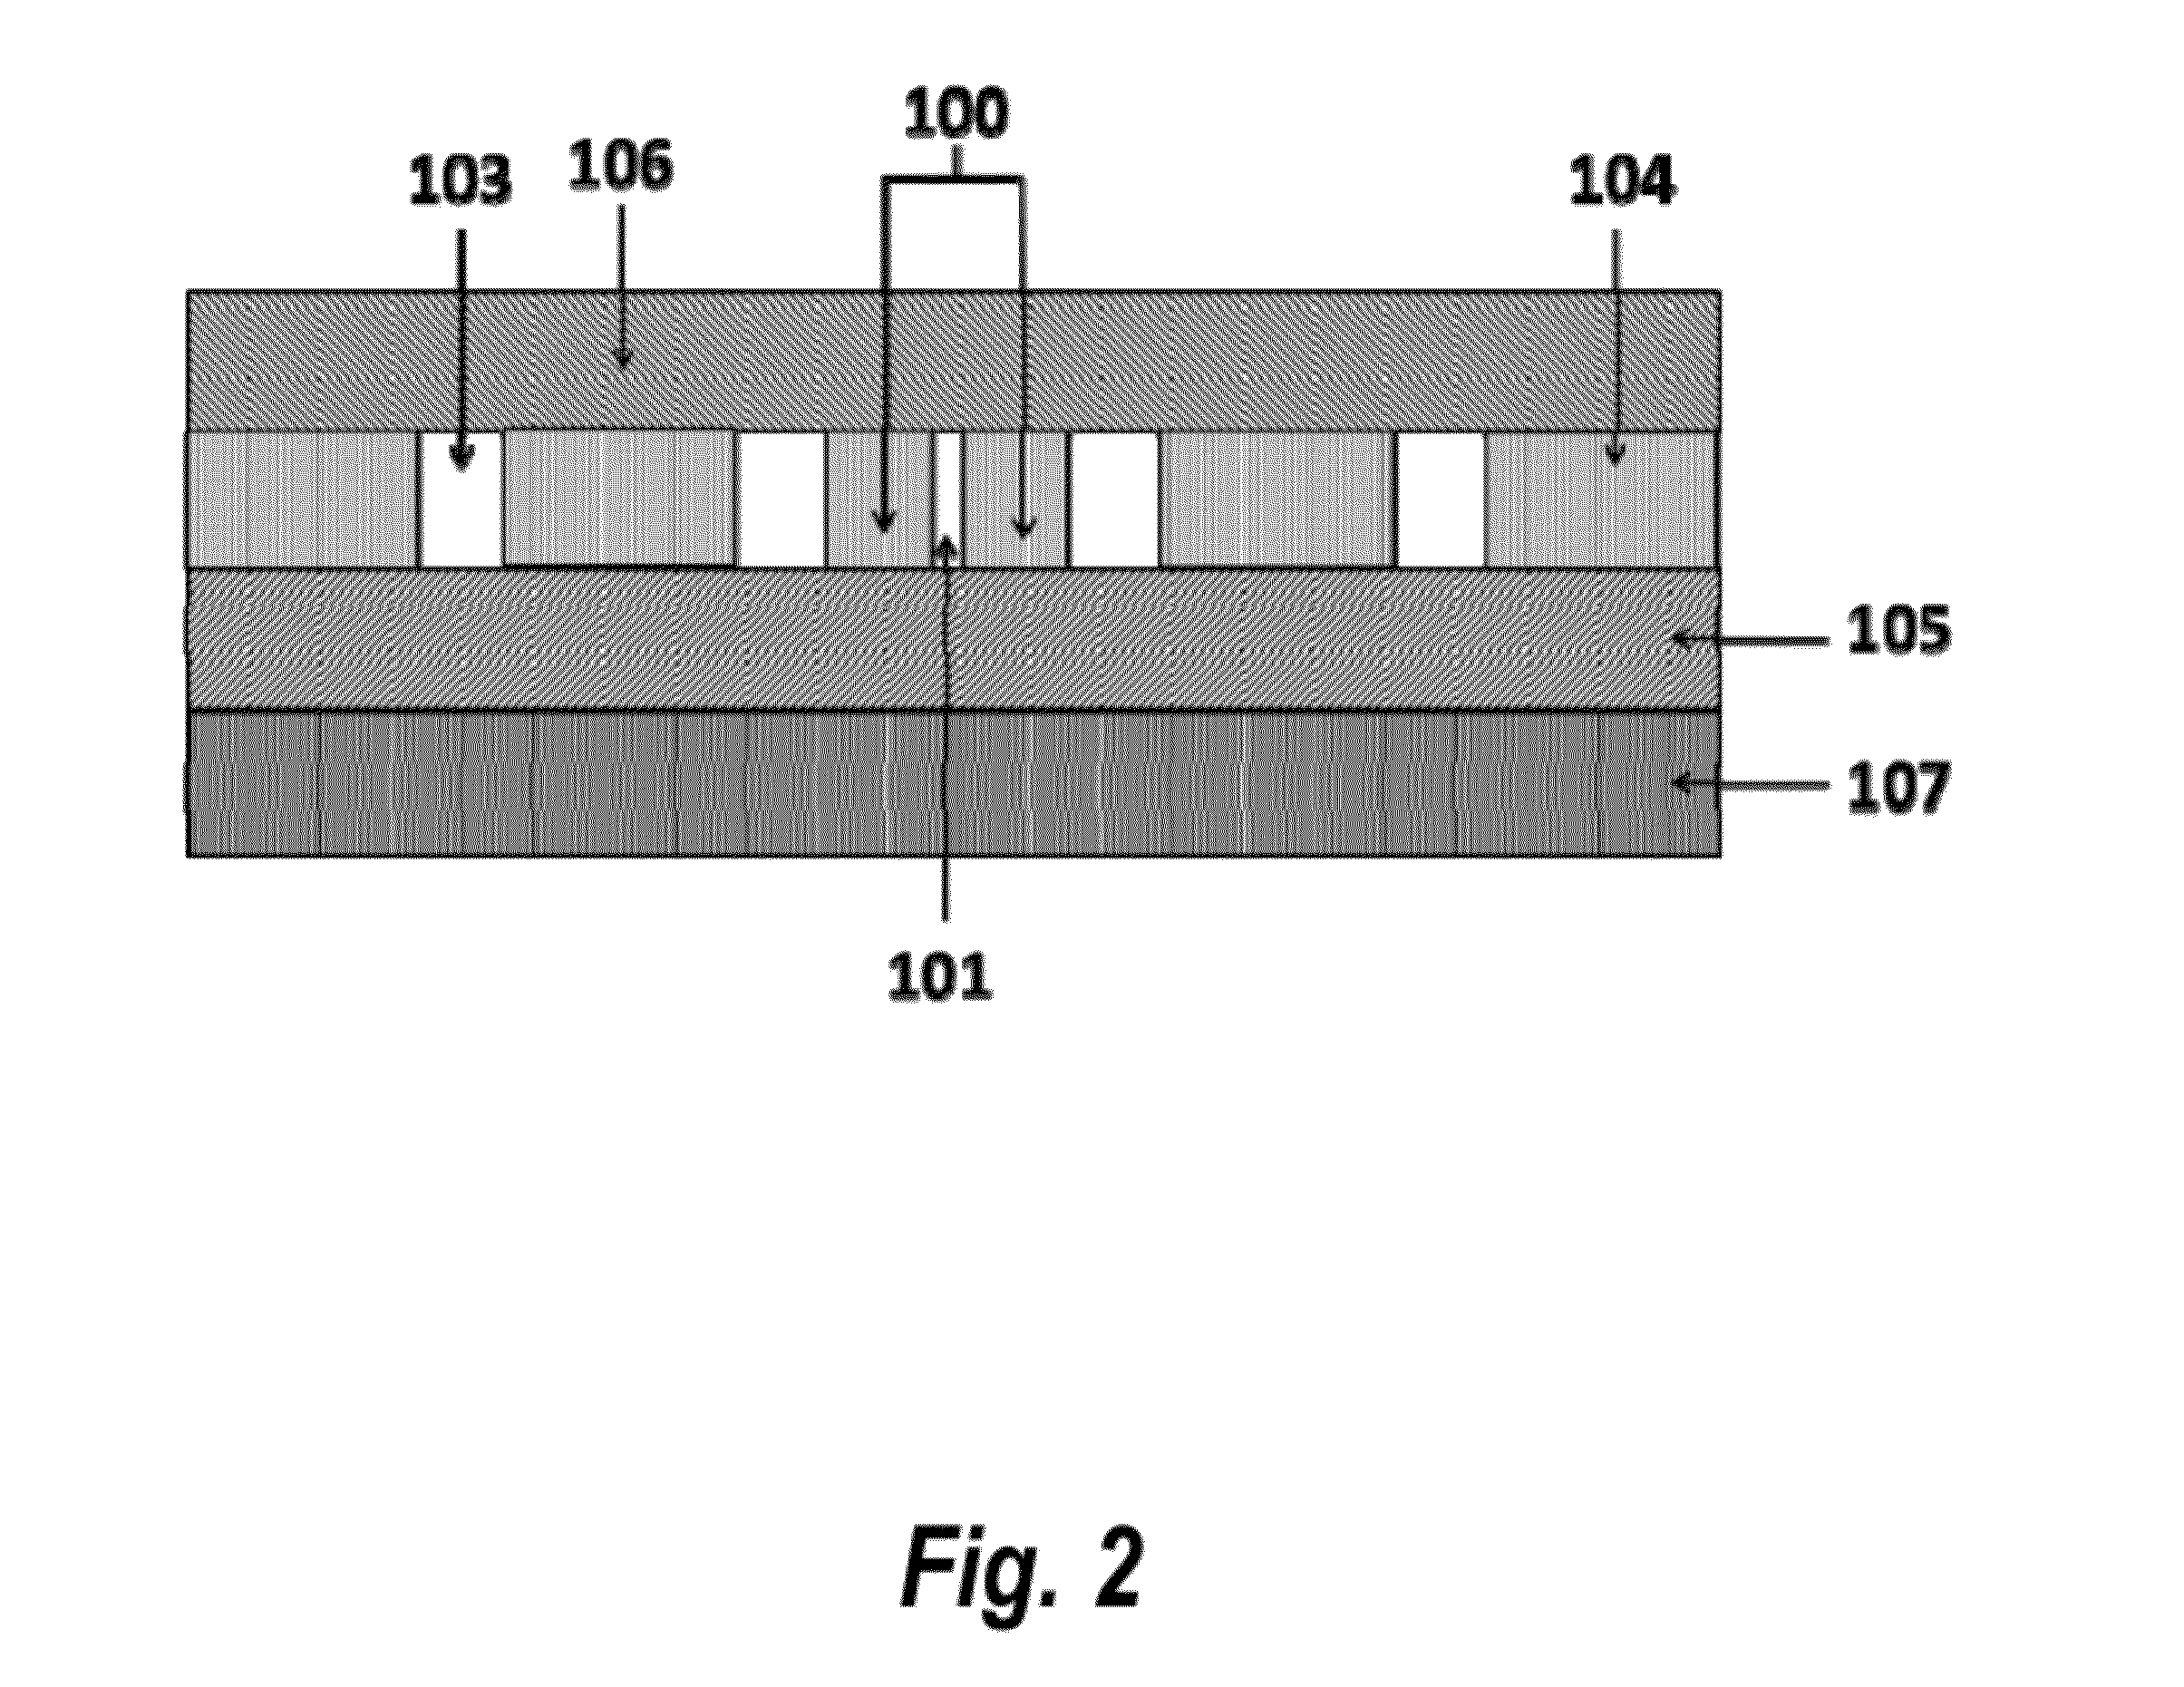 Photonic crystal slot waveguide miniature on-chip absorption spectrometer